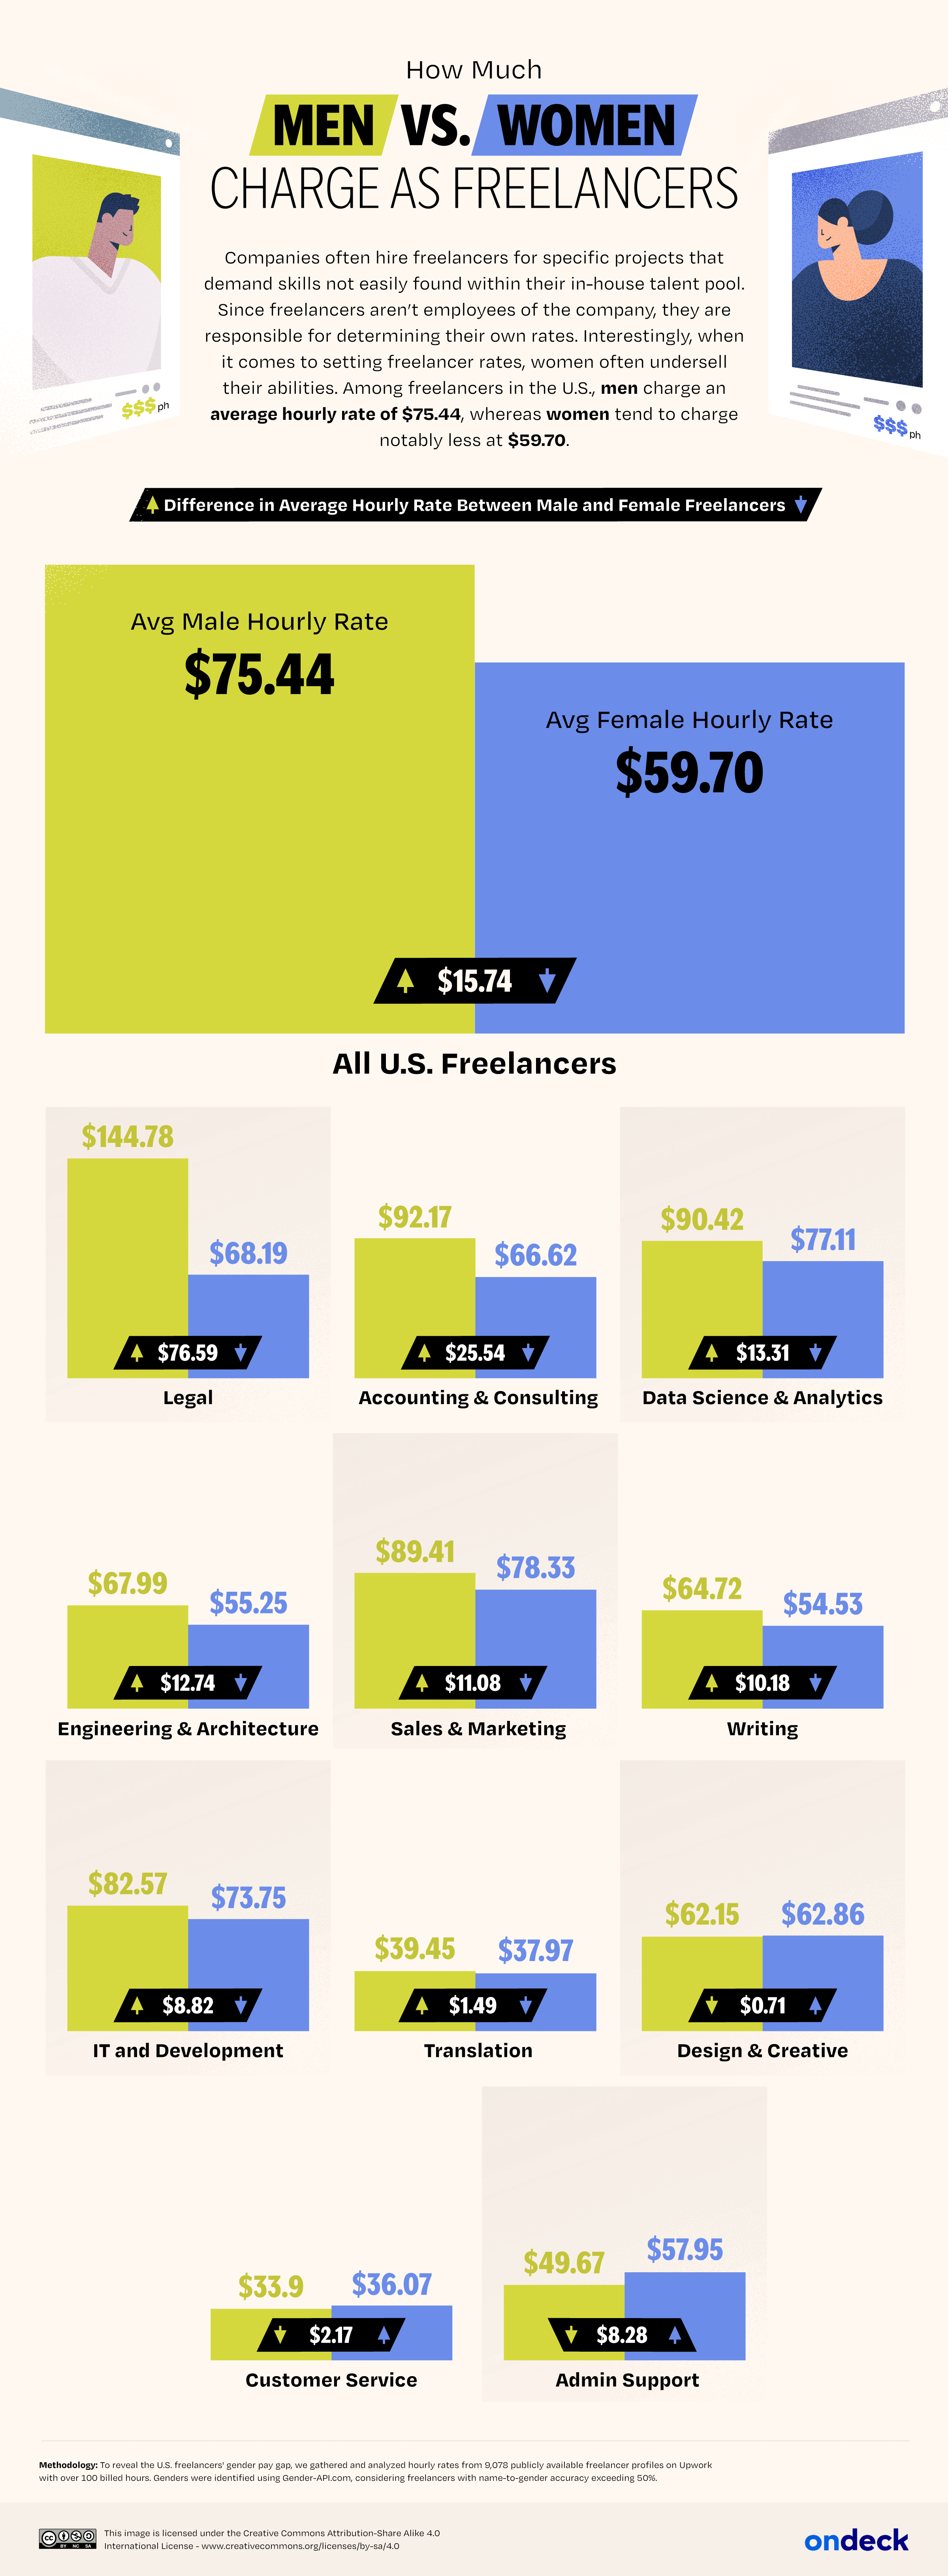 Infographic showing how much men versus women charge as freelancers